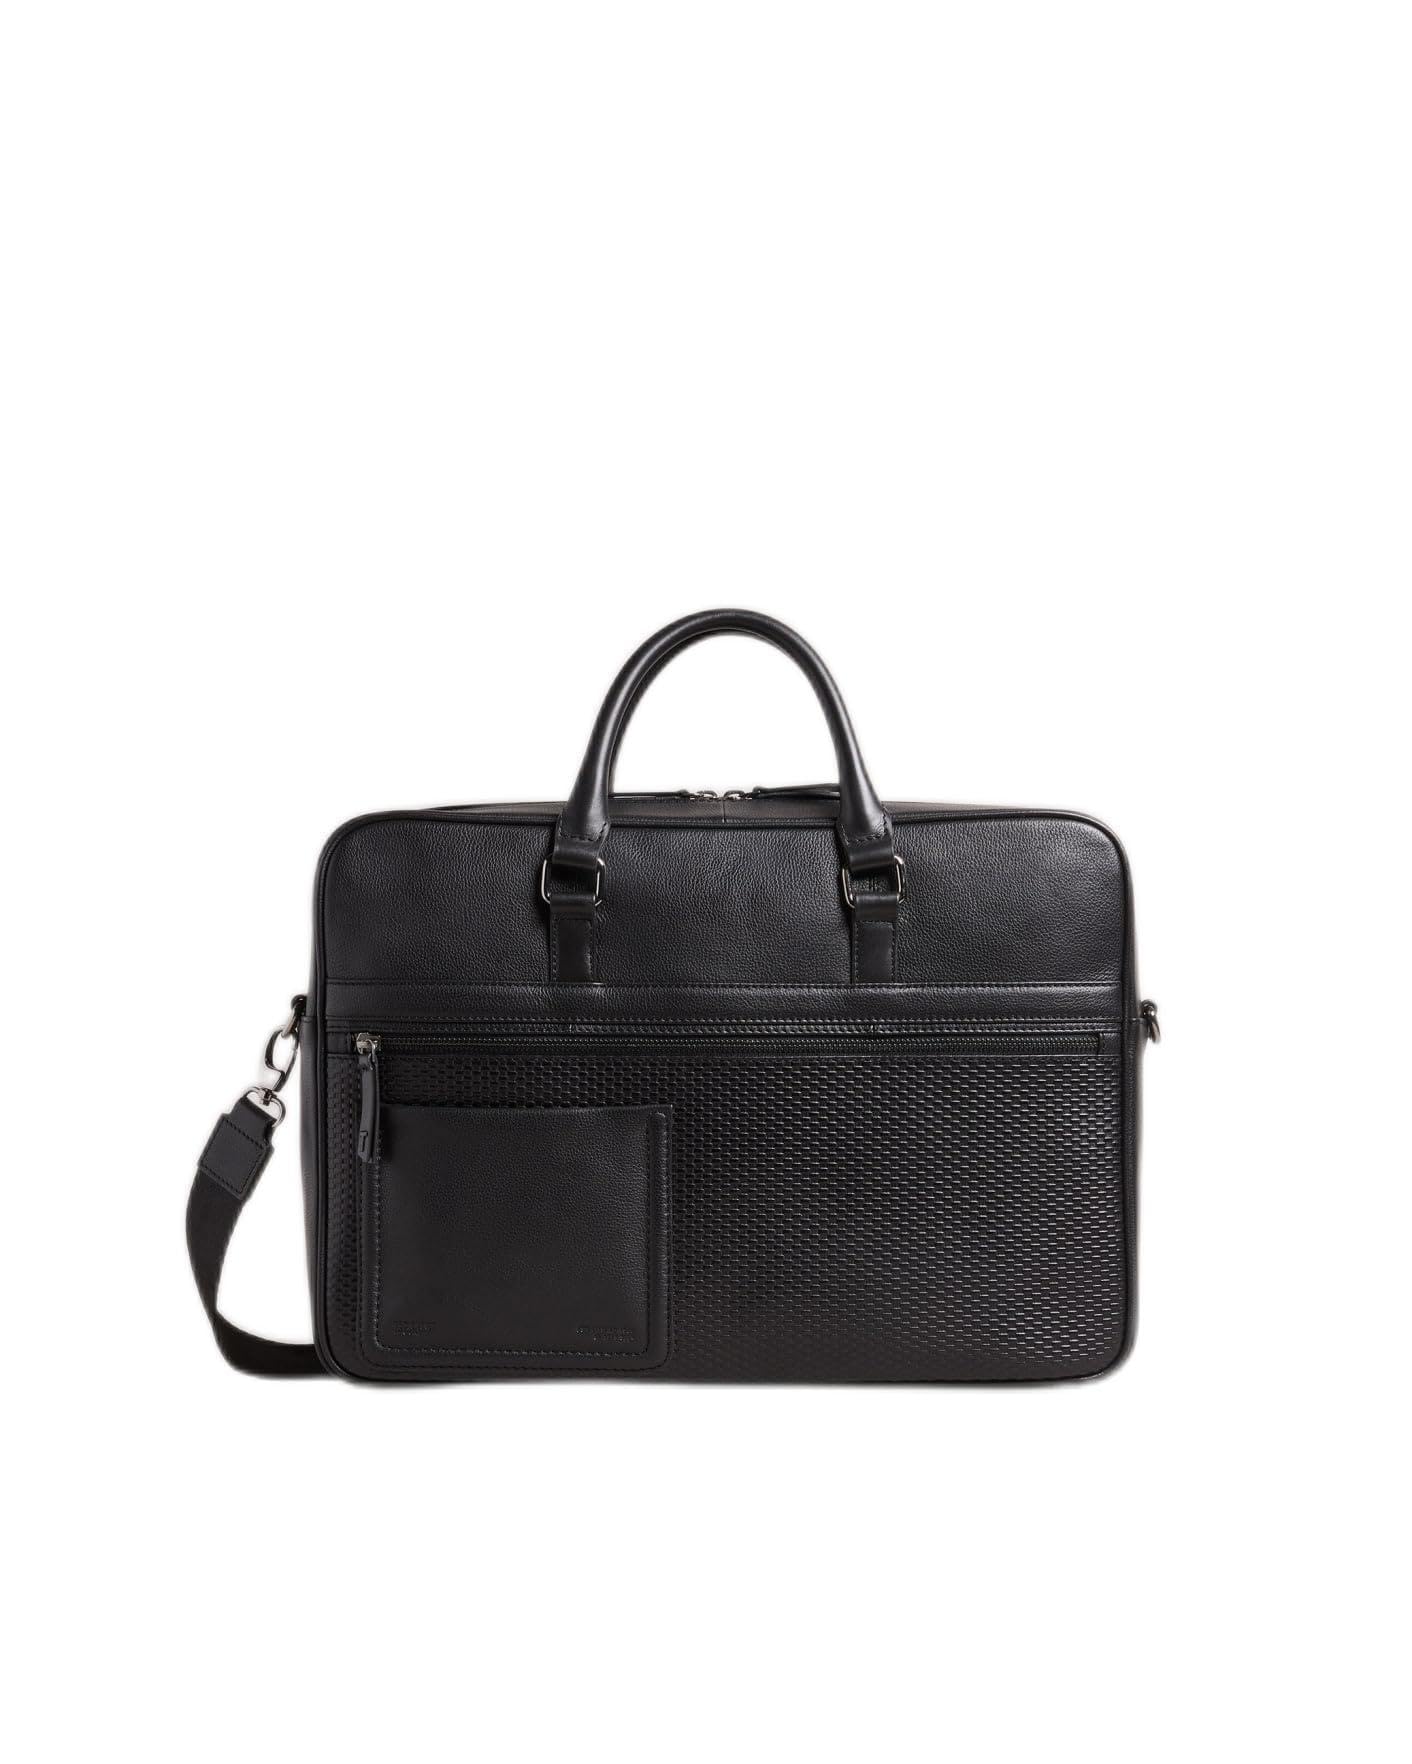 Ted Baker London CANVESS Texture Leather Document Bag, Black